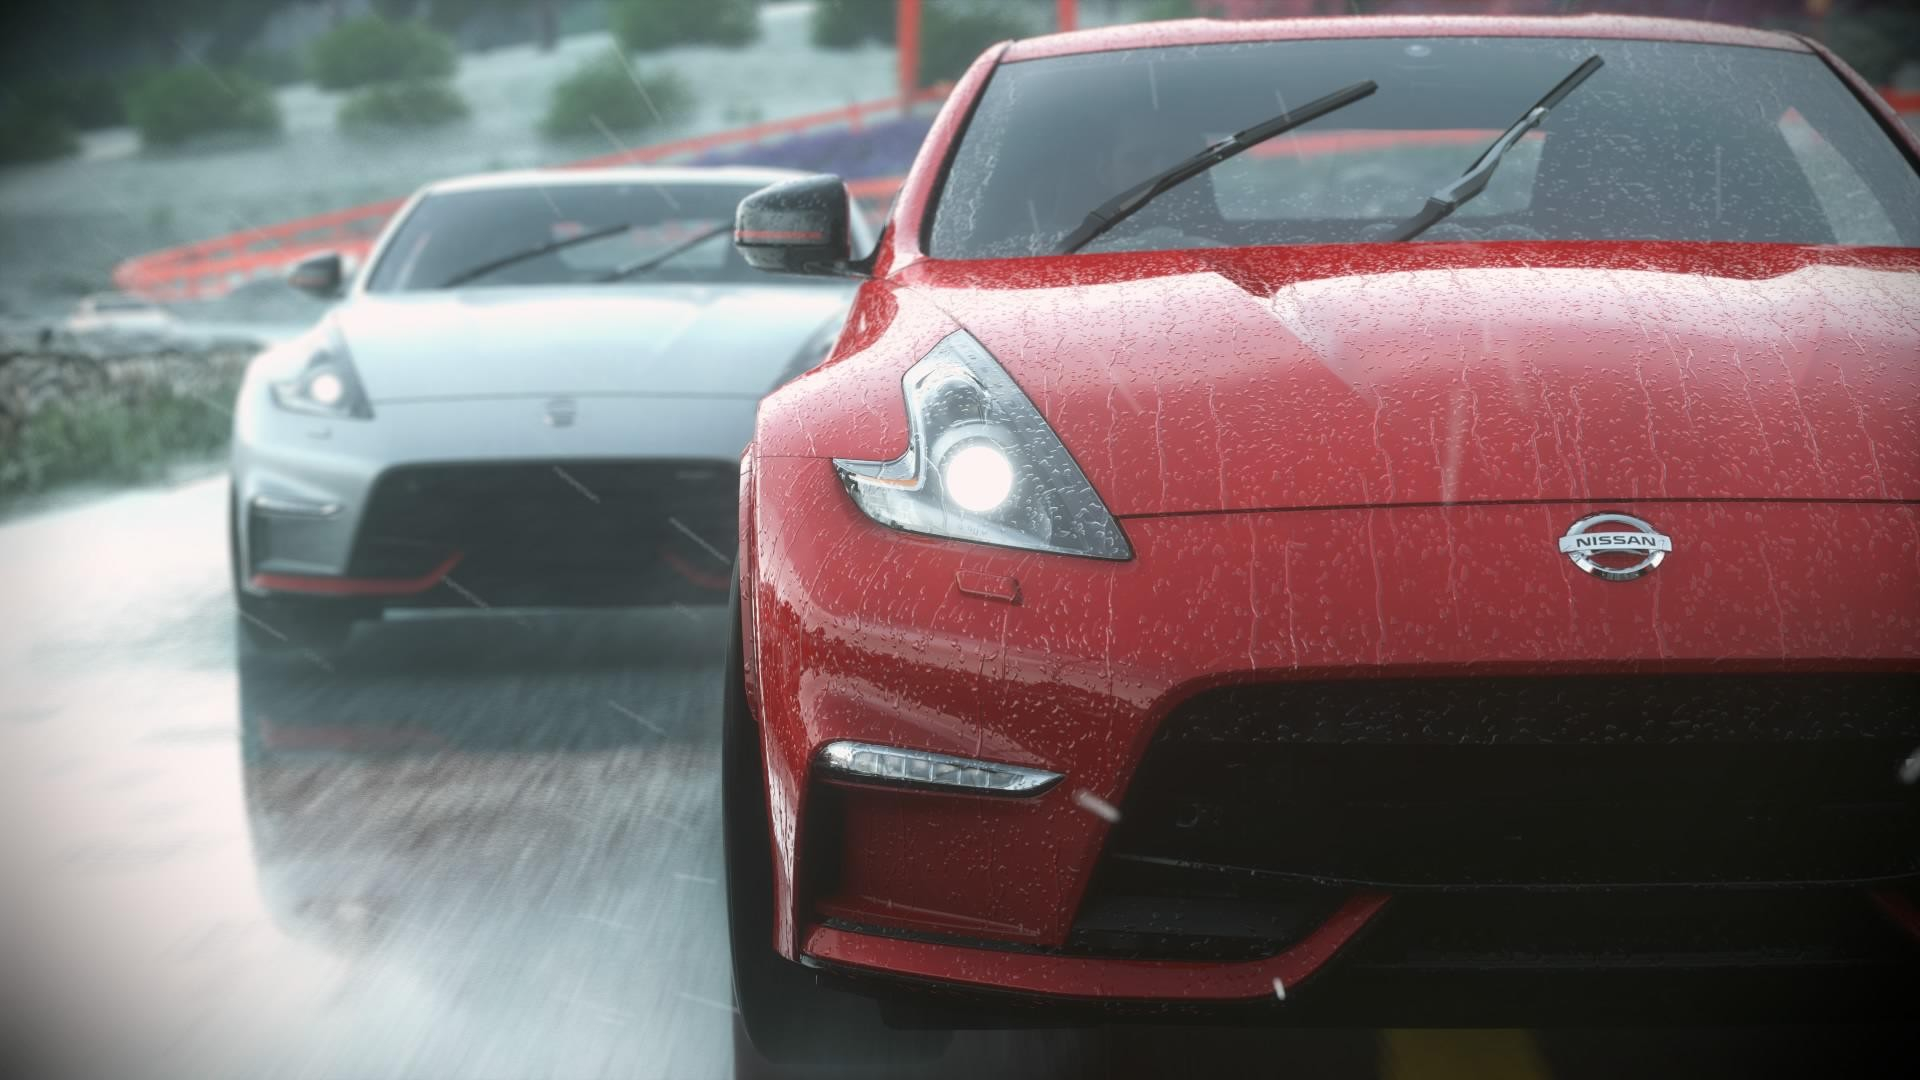 1920x1080 Wallpaper : px, car, Driveclub, Nismo, Nissan 370Z, Photorealism, video games CoolWallpapers 667450 HD Wallpapers